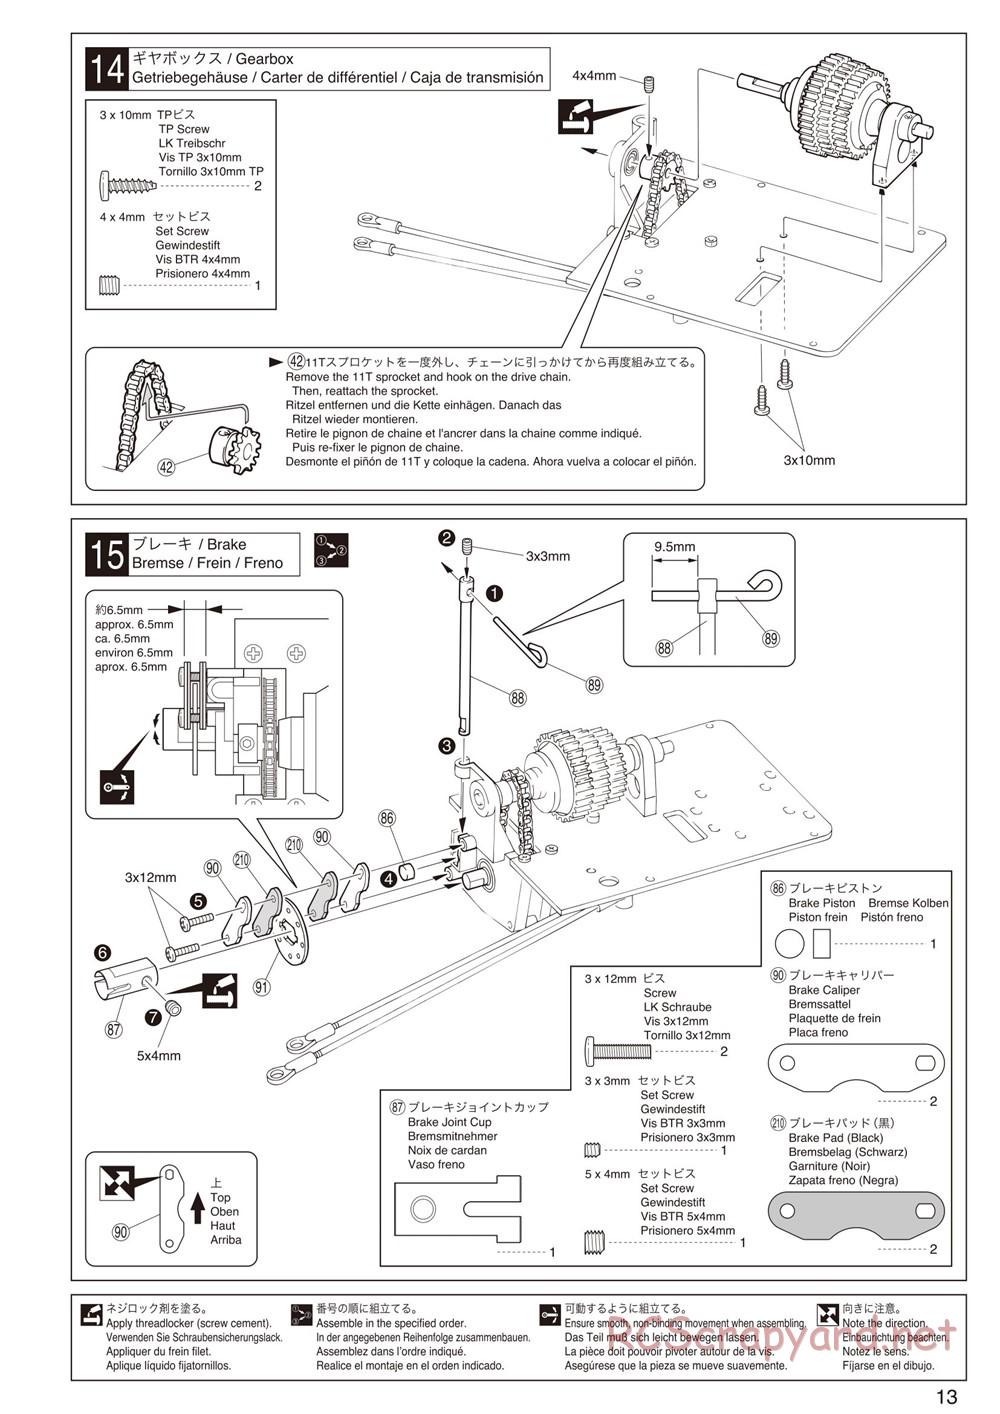 Kyosho - Mad Force Cruiser - Manual - Page 13